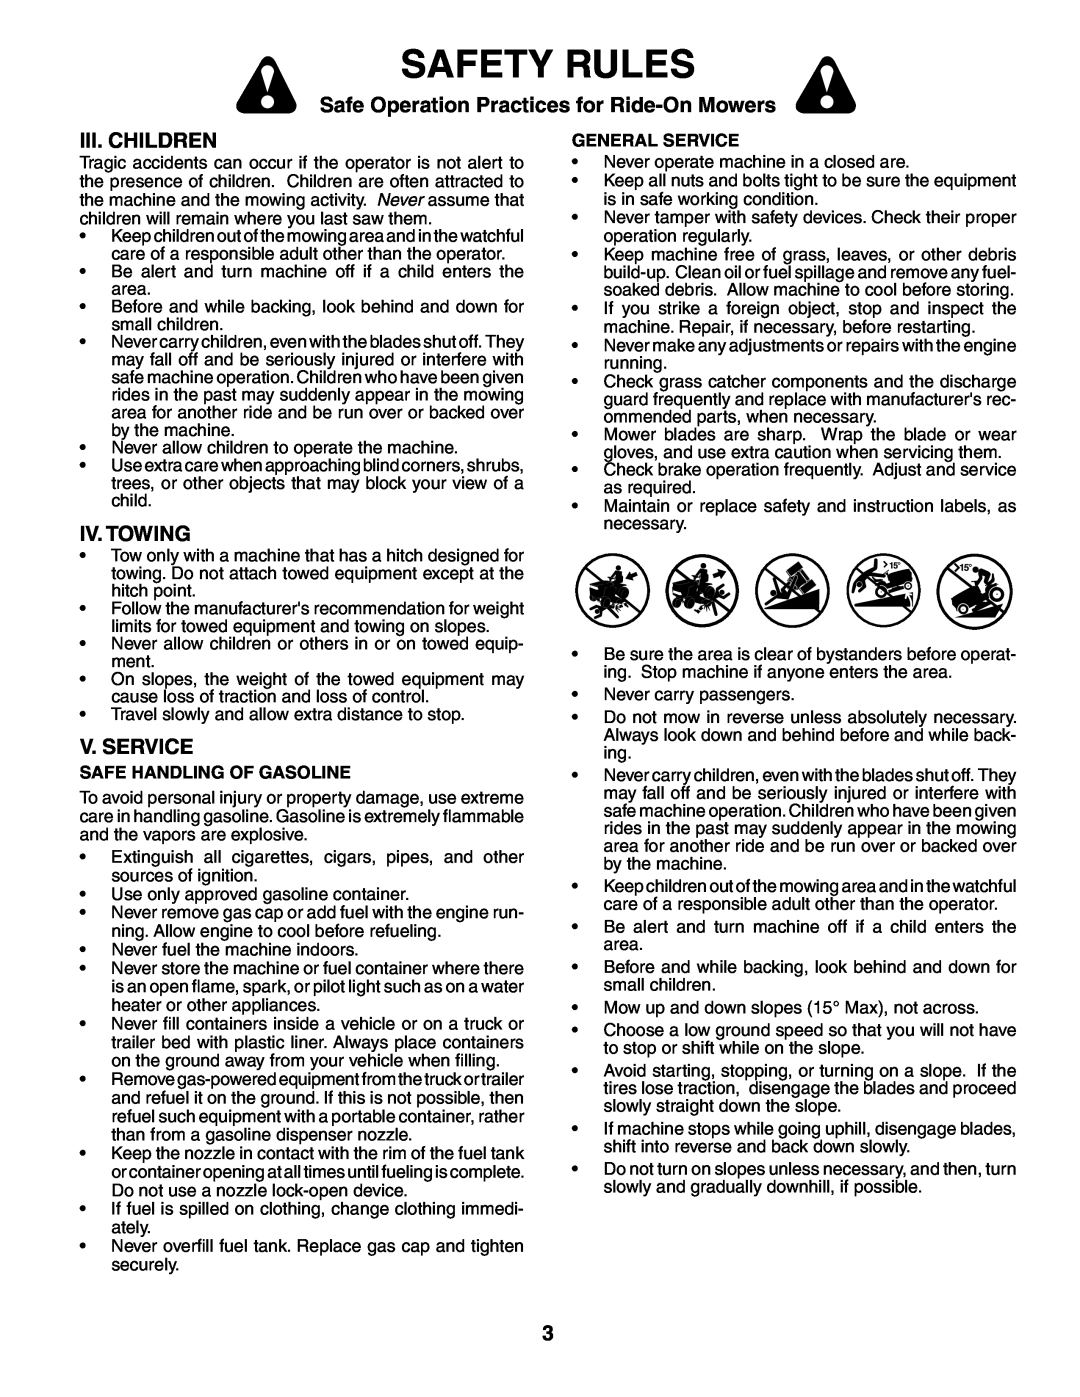 Poulan HDK19H42 manual Iii. Children, Iv. Towing, V. Service, Safety Rules, Safe Operation Practices for Ride-On Mowers 